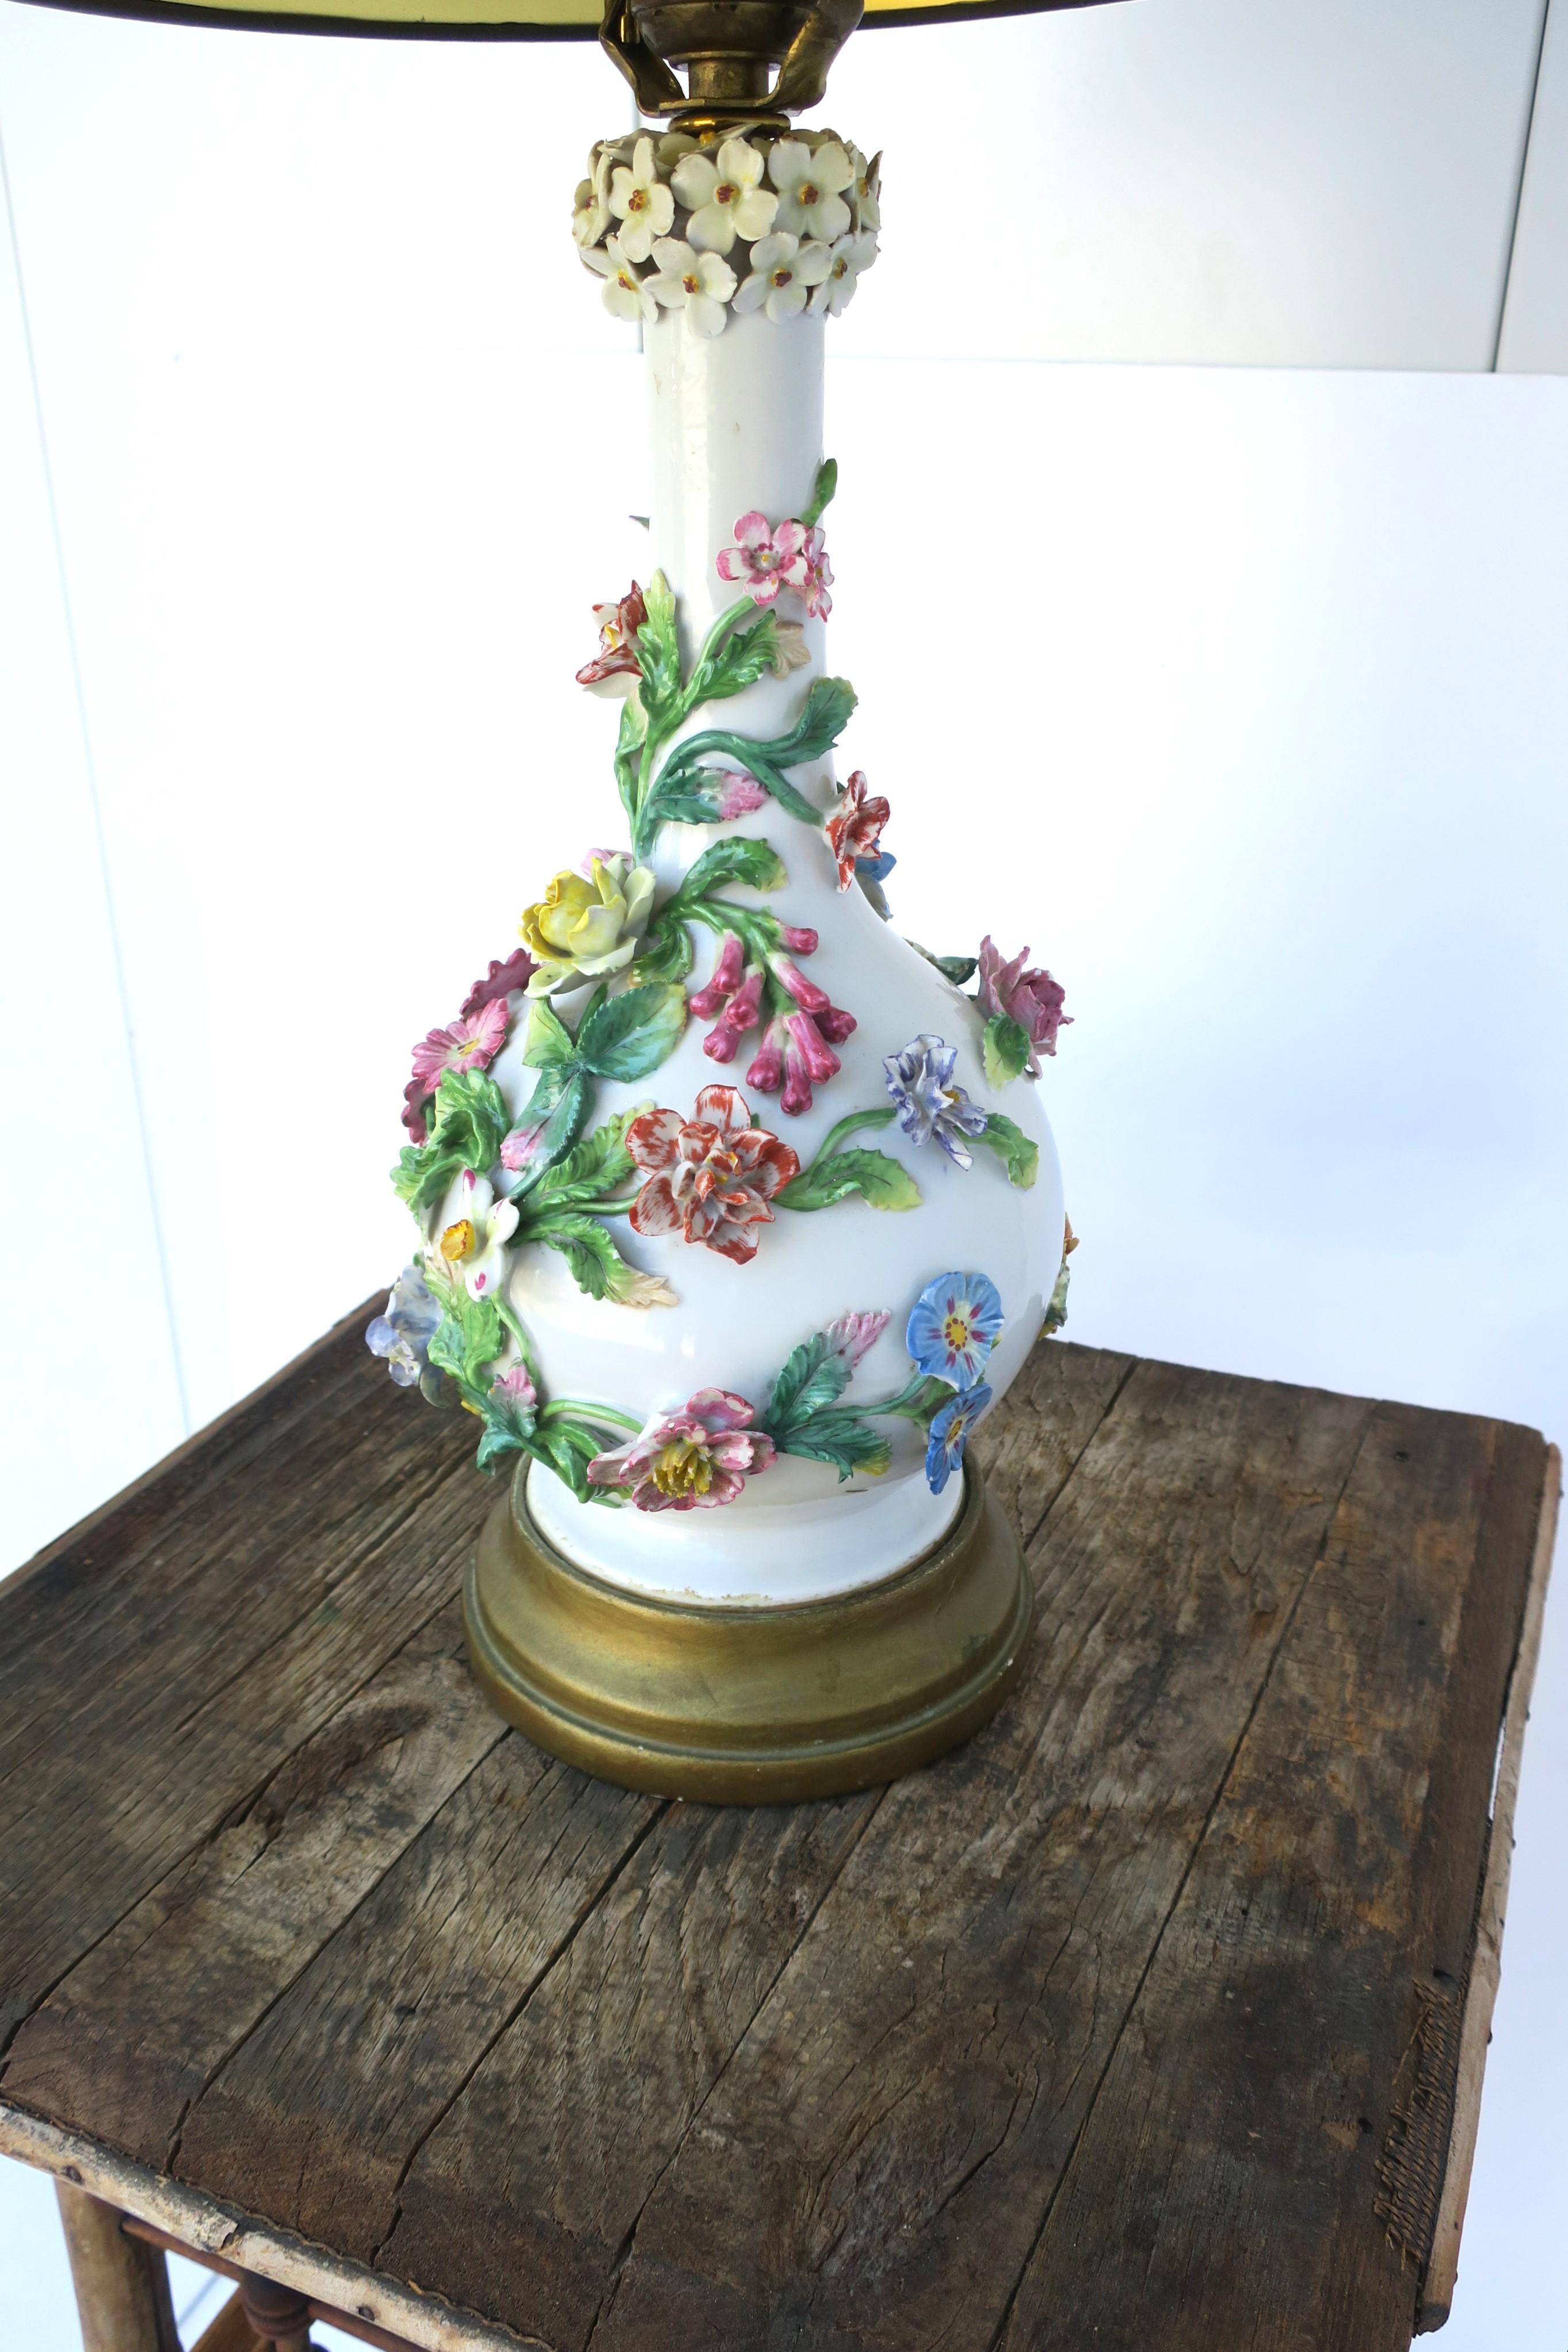 Italian White Porcelain Lamp with Colorful Flowers, Leaves & Vines Capo di Monte For Sale 4